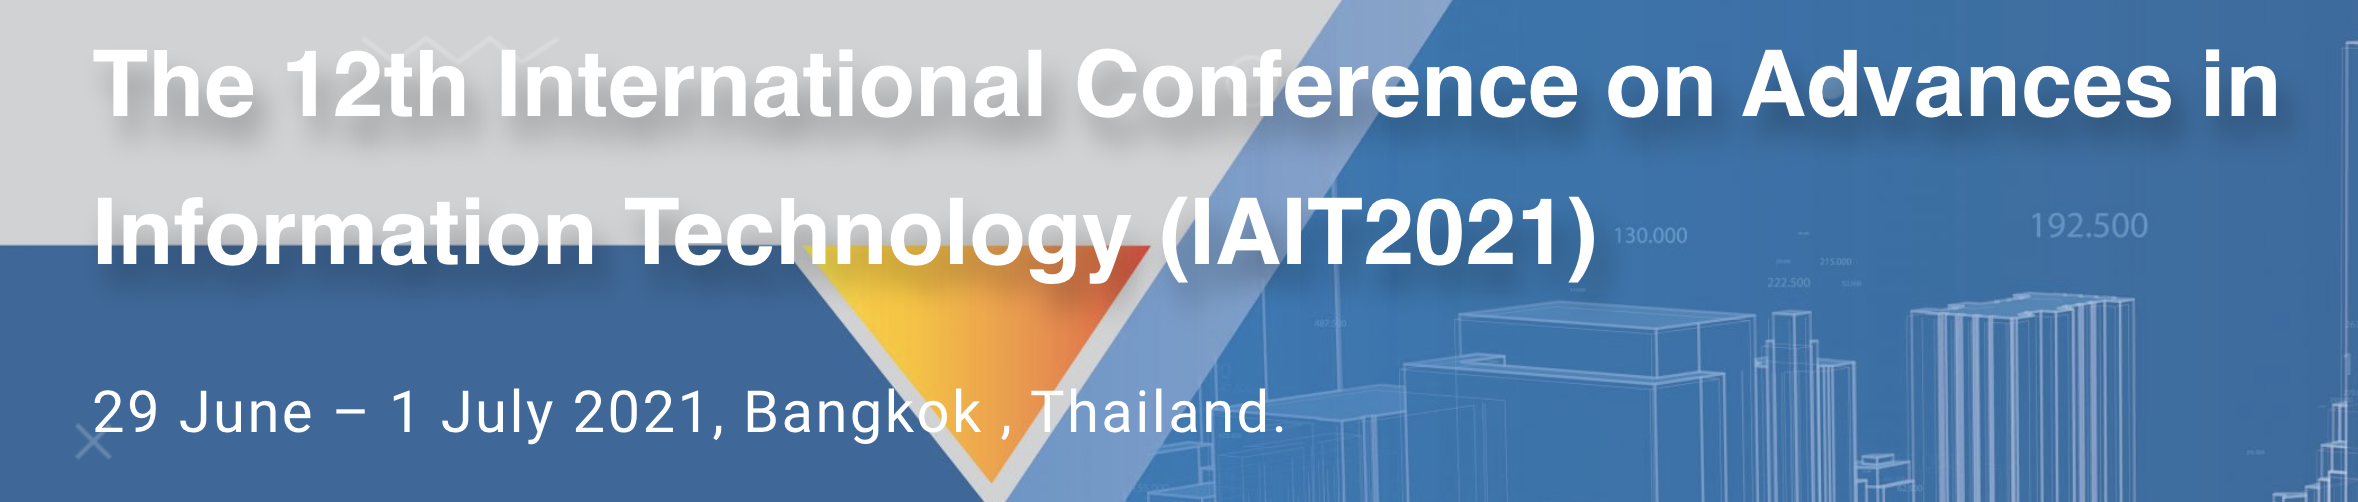 The International Conference on Advances in Information Technology (IAIT2021)